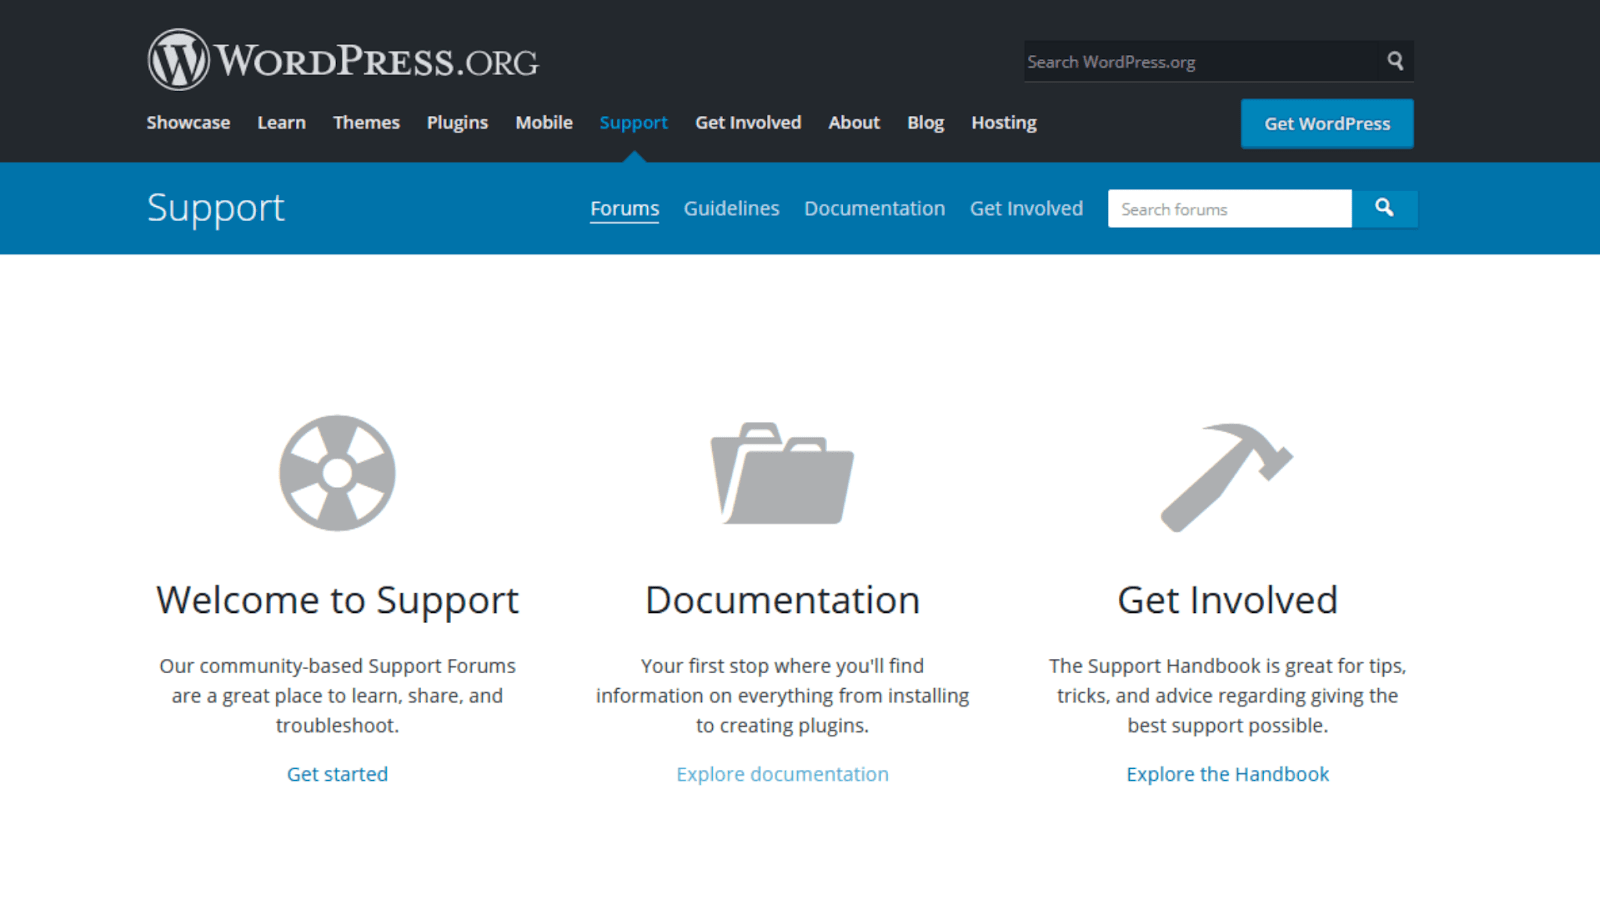 WordPress - support forums and documentation